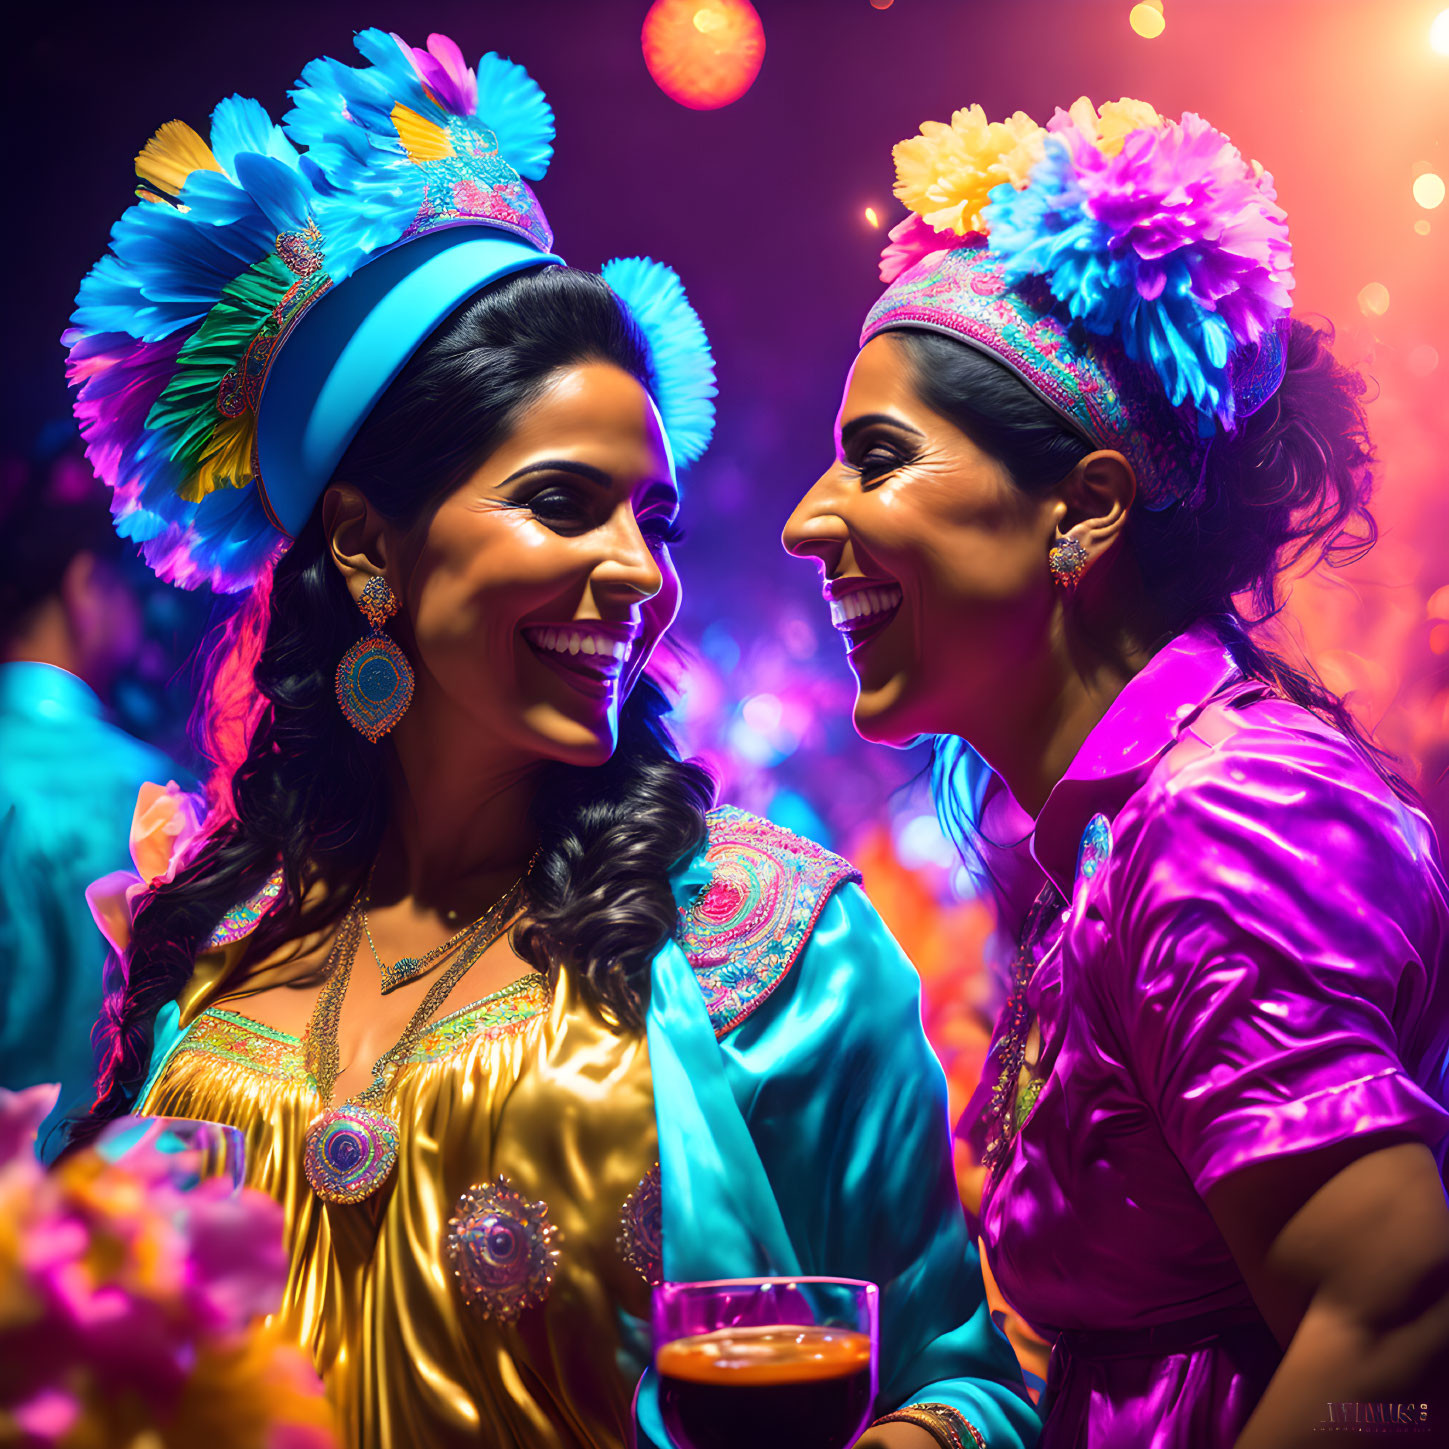 Two women in vibrant Indian attire laughing at festive celebration